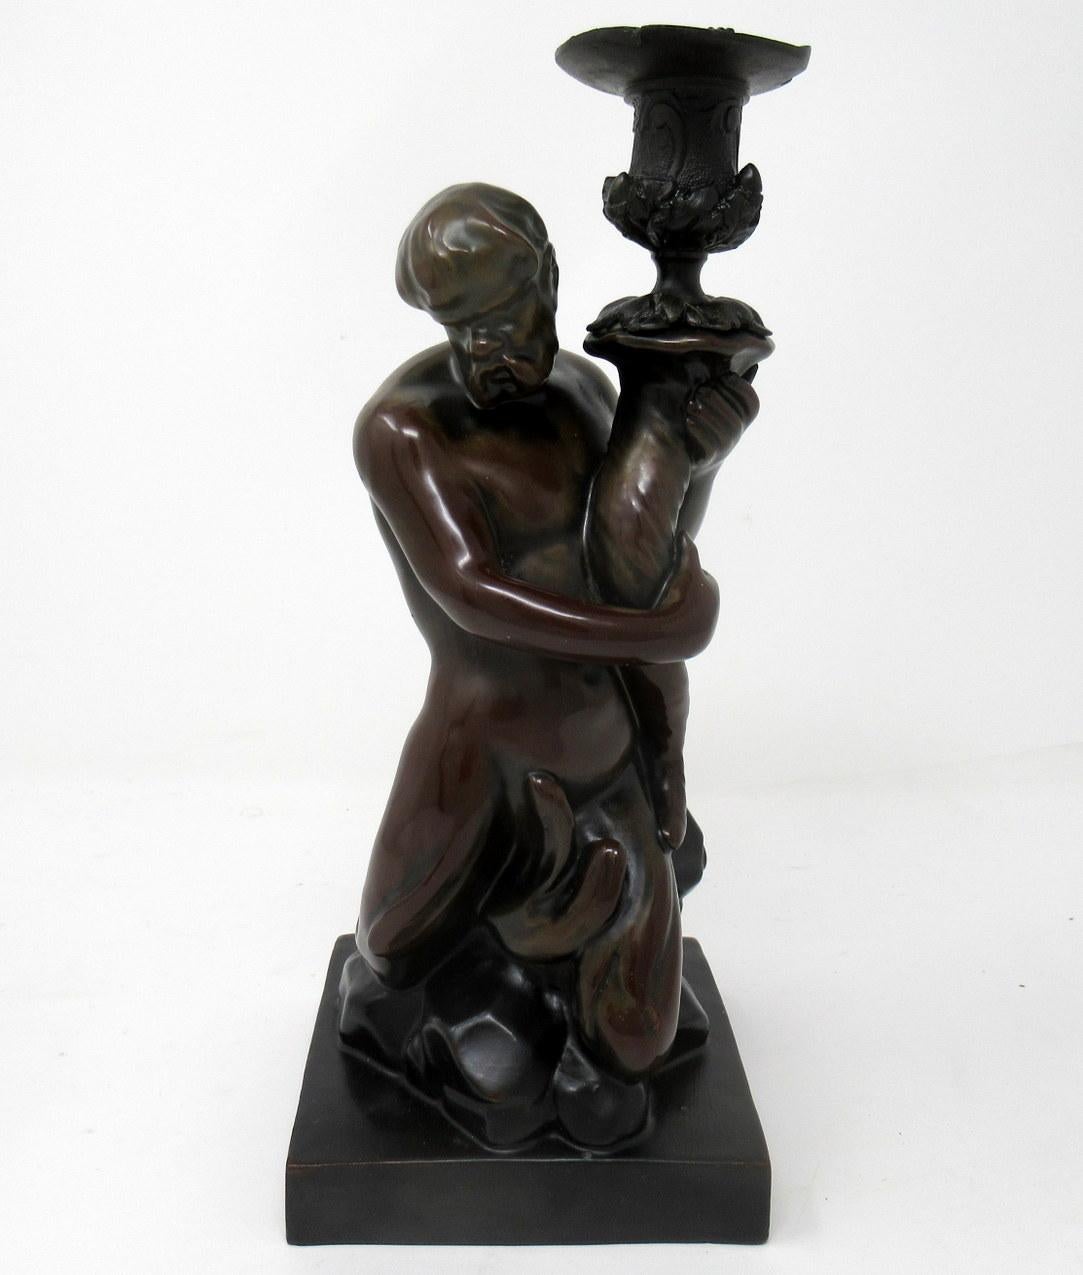 

Rare Bronze Glazed Staffordshire Pottery Male Nude Figure of a Triton made by Wood and Caldwell after a bronze by John Flaxman 1755-1826, first quarter of the Nineteenth Century. 

Le personnage est assis sur un rocher et tient une corne